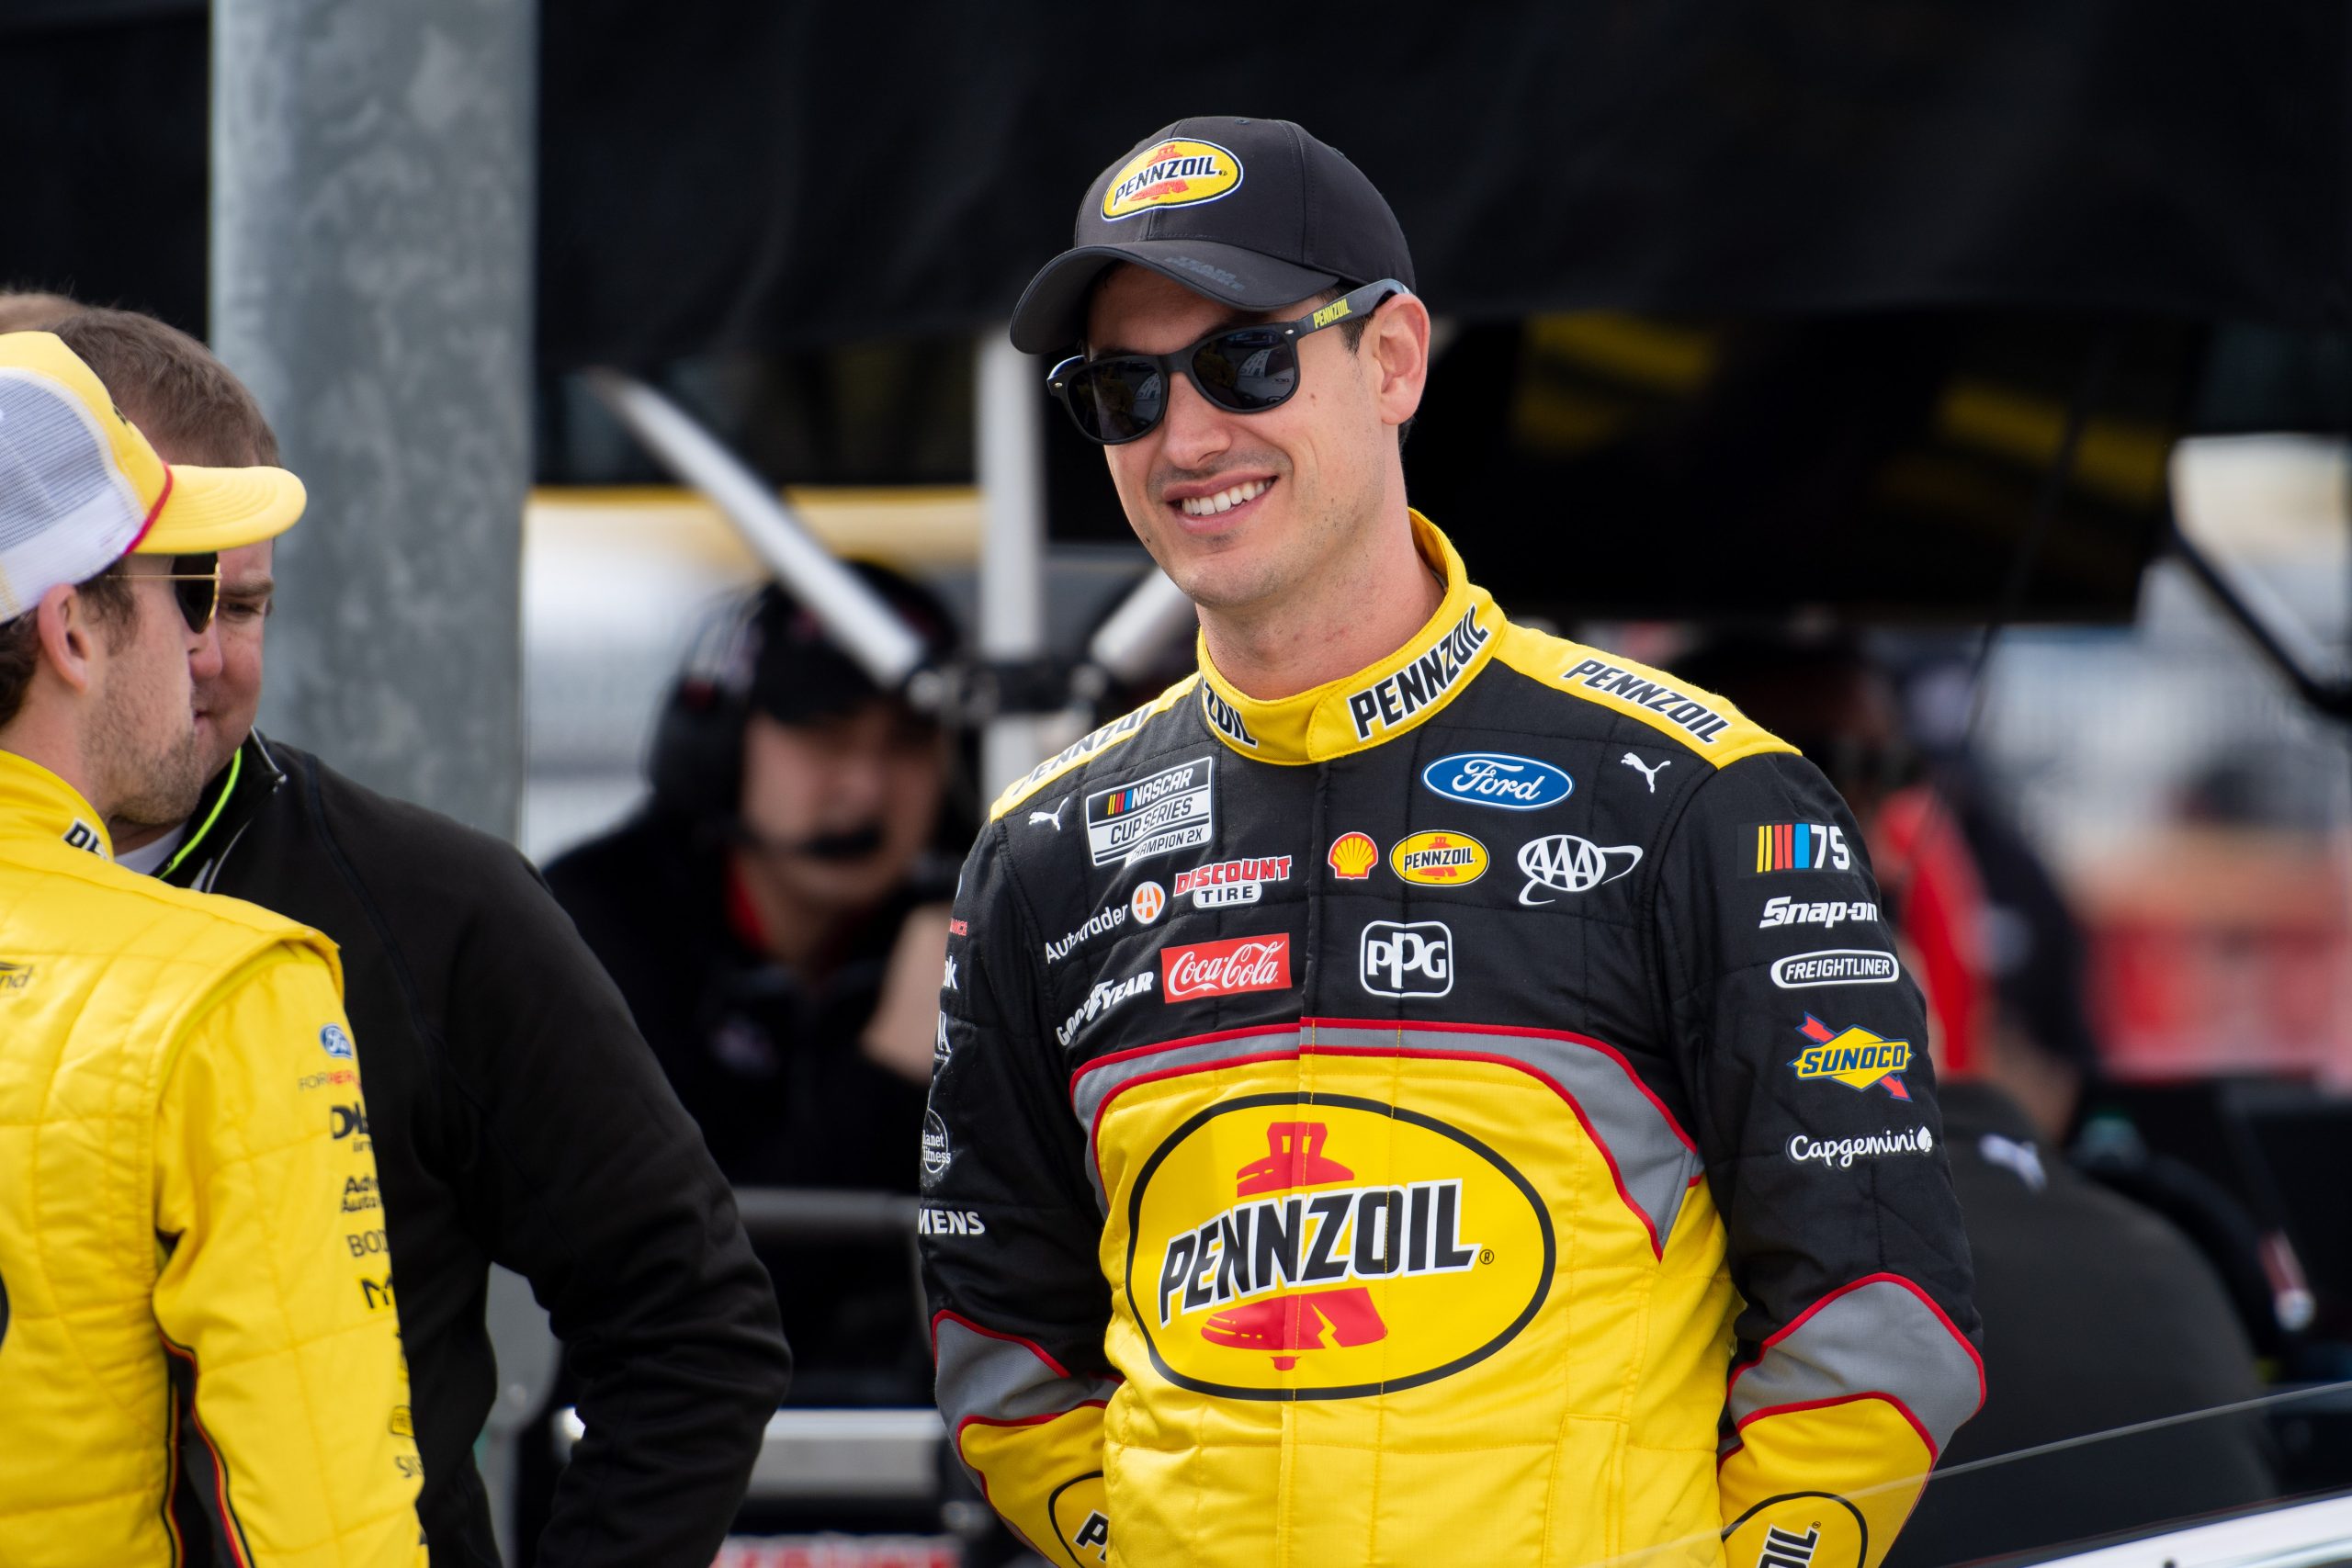 When Joey Logano is all smiles, it is usually bad news for the competition. (Photo: Myk Crawford | The Podium Finish)